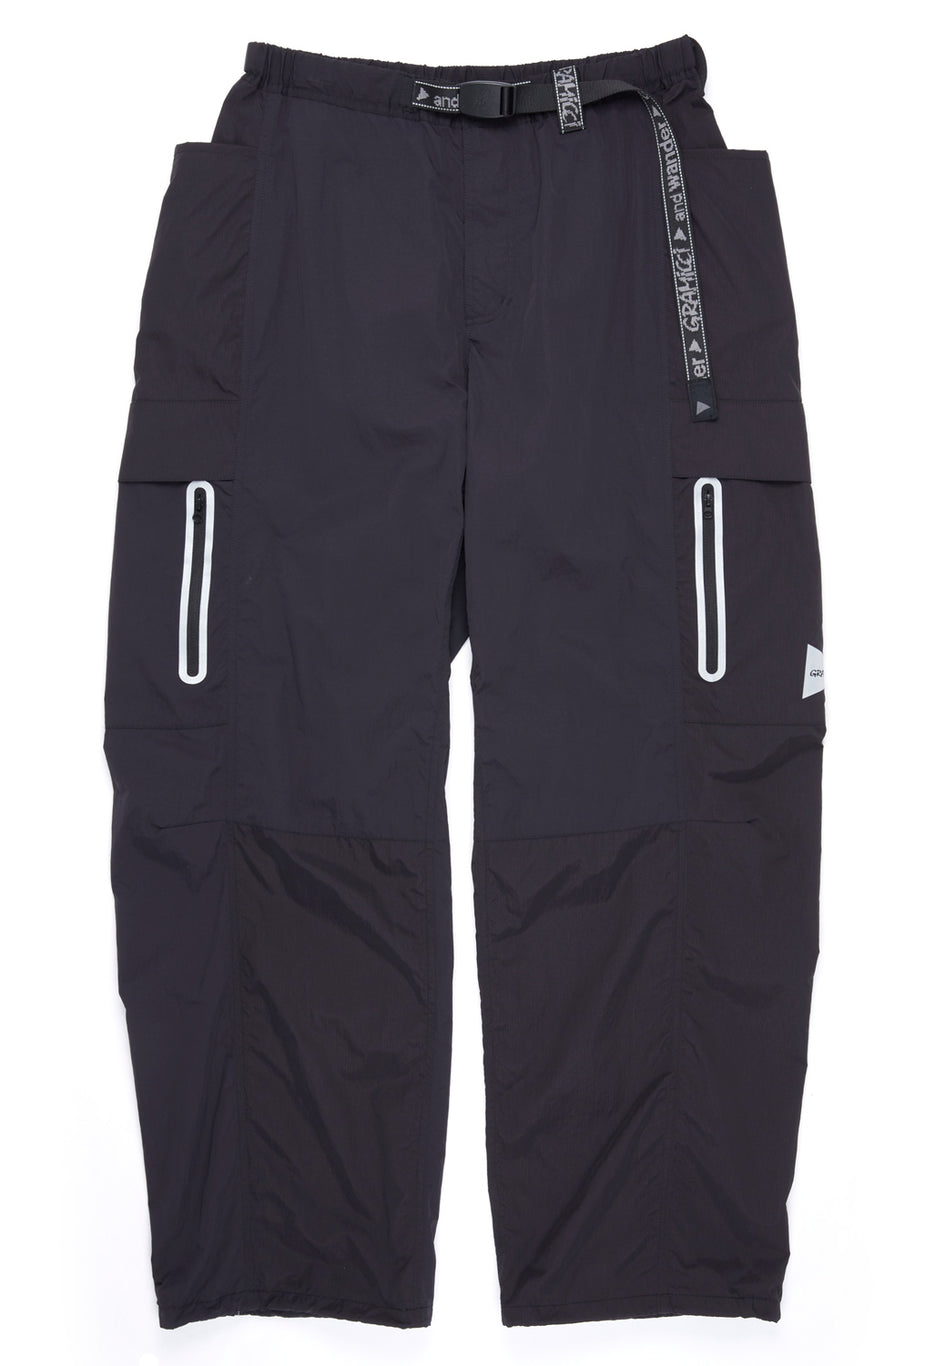 Gramicci x And Wander Patchwork Wind Pants - Black